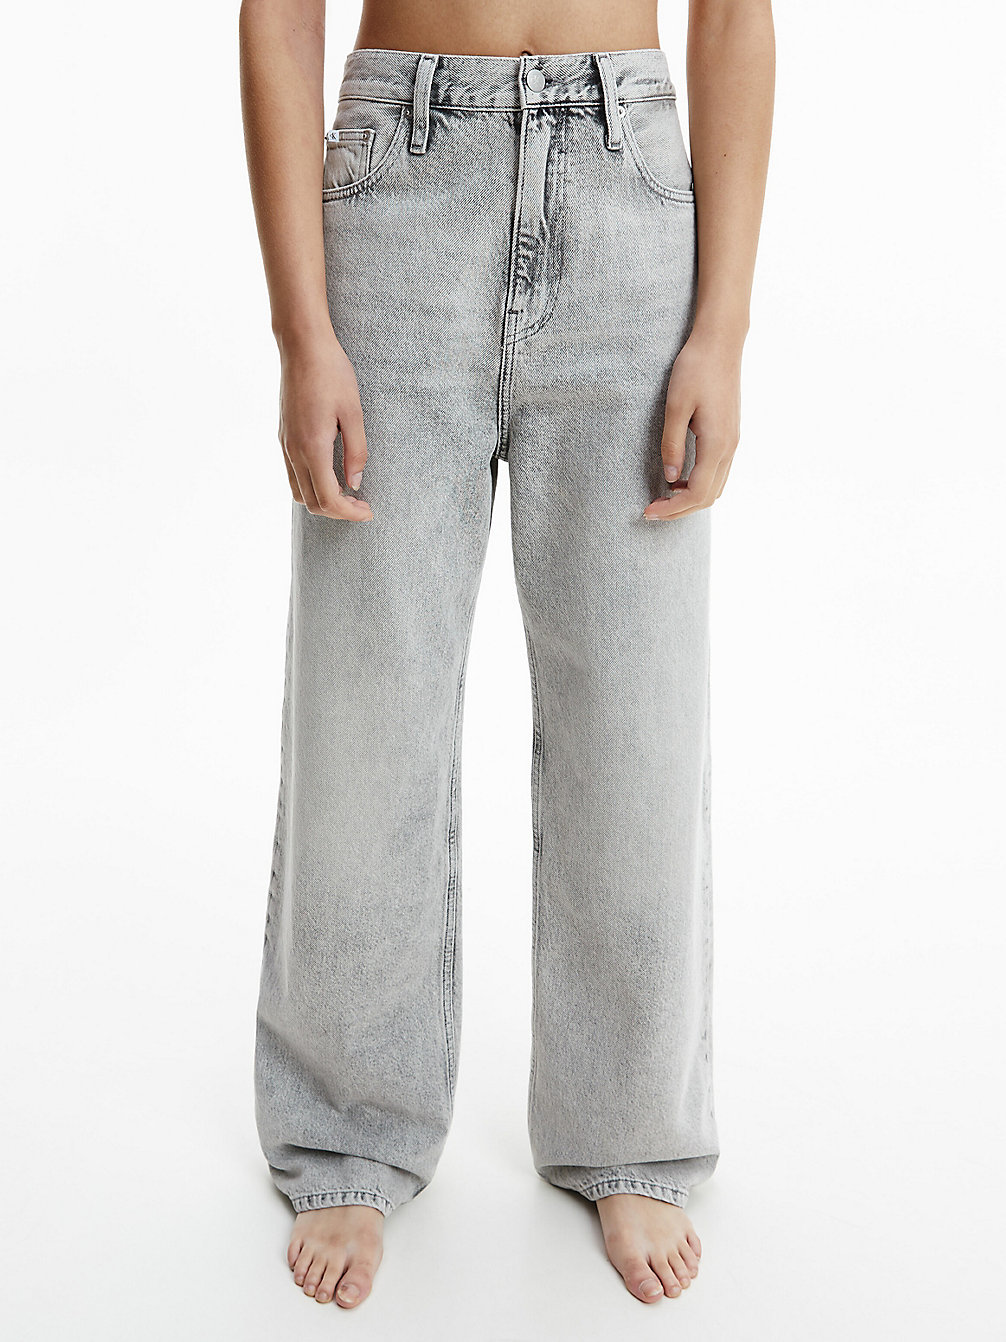 High Rise Relaxed Jeans > DENIM GREY > undefined donna > Calvin Klein